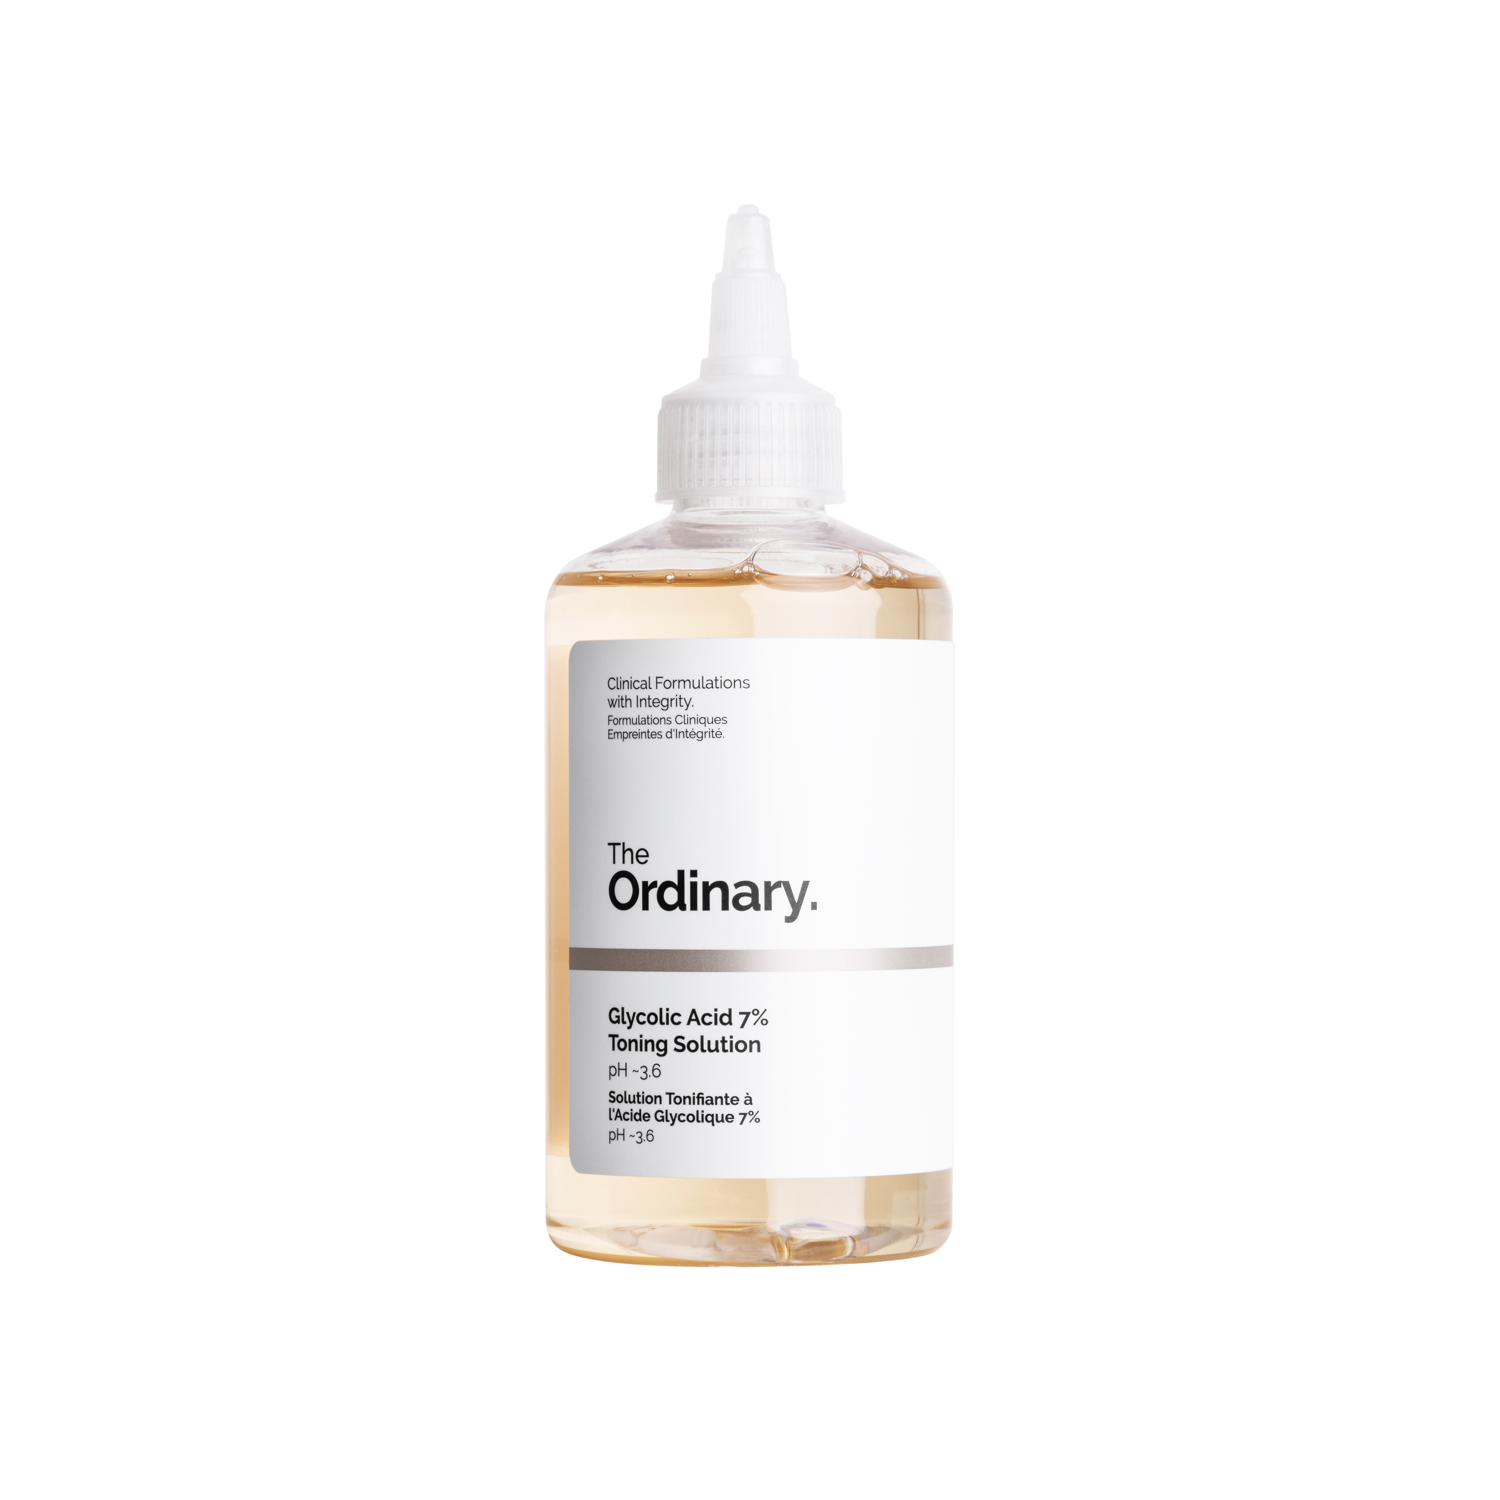 The Ordinary_Glycolic Acid 7% Toning Solution_240ml_13.90EUR